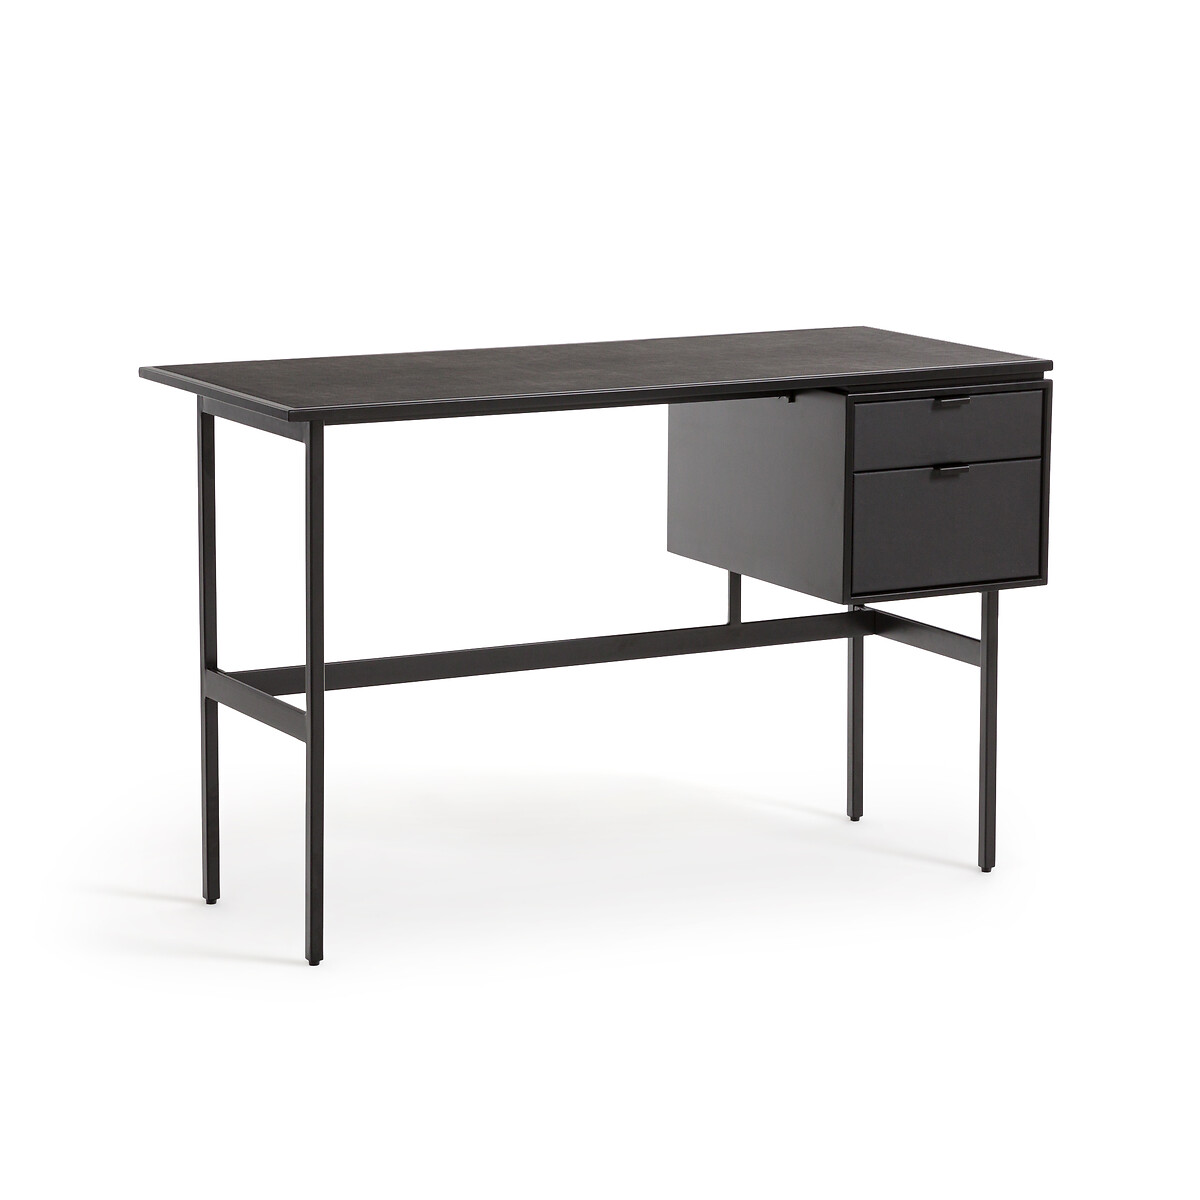 Realto Metal and Leather Desk